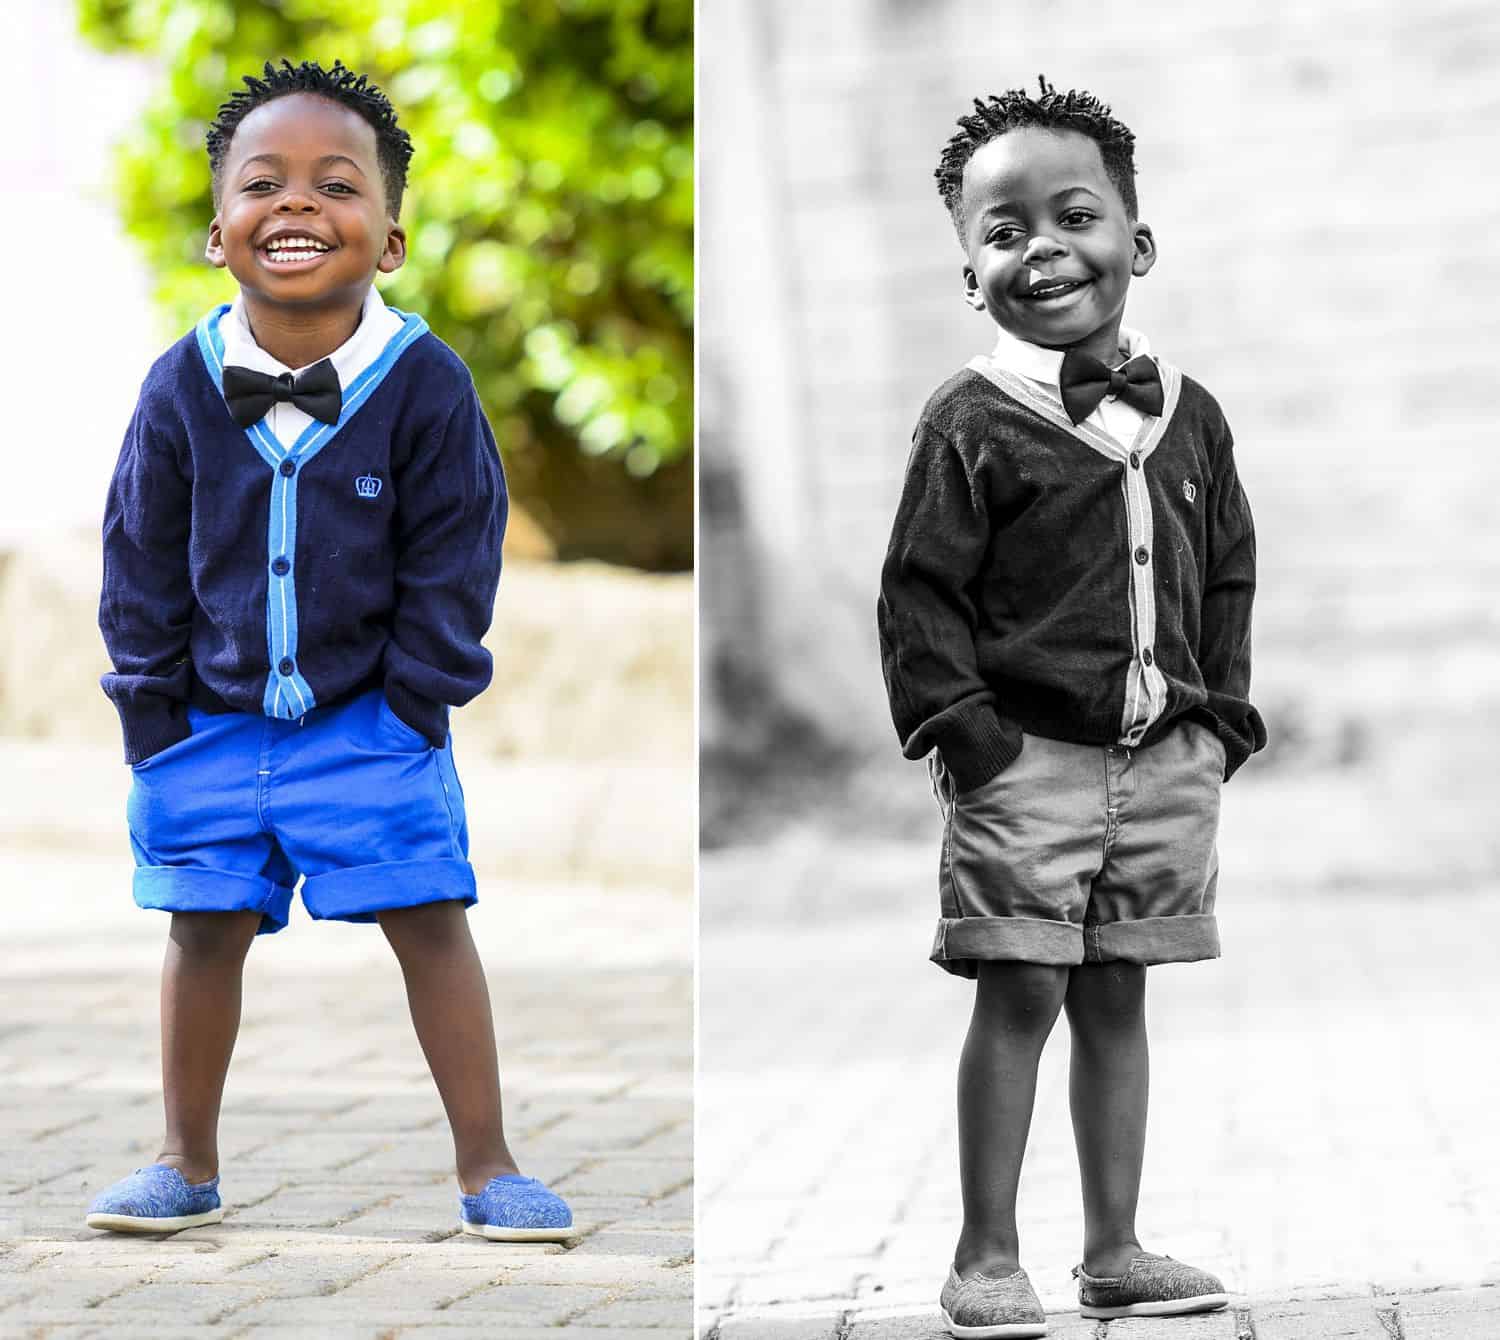 Photos of a young boy posing with his hands in his pockets